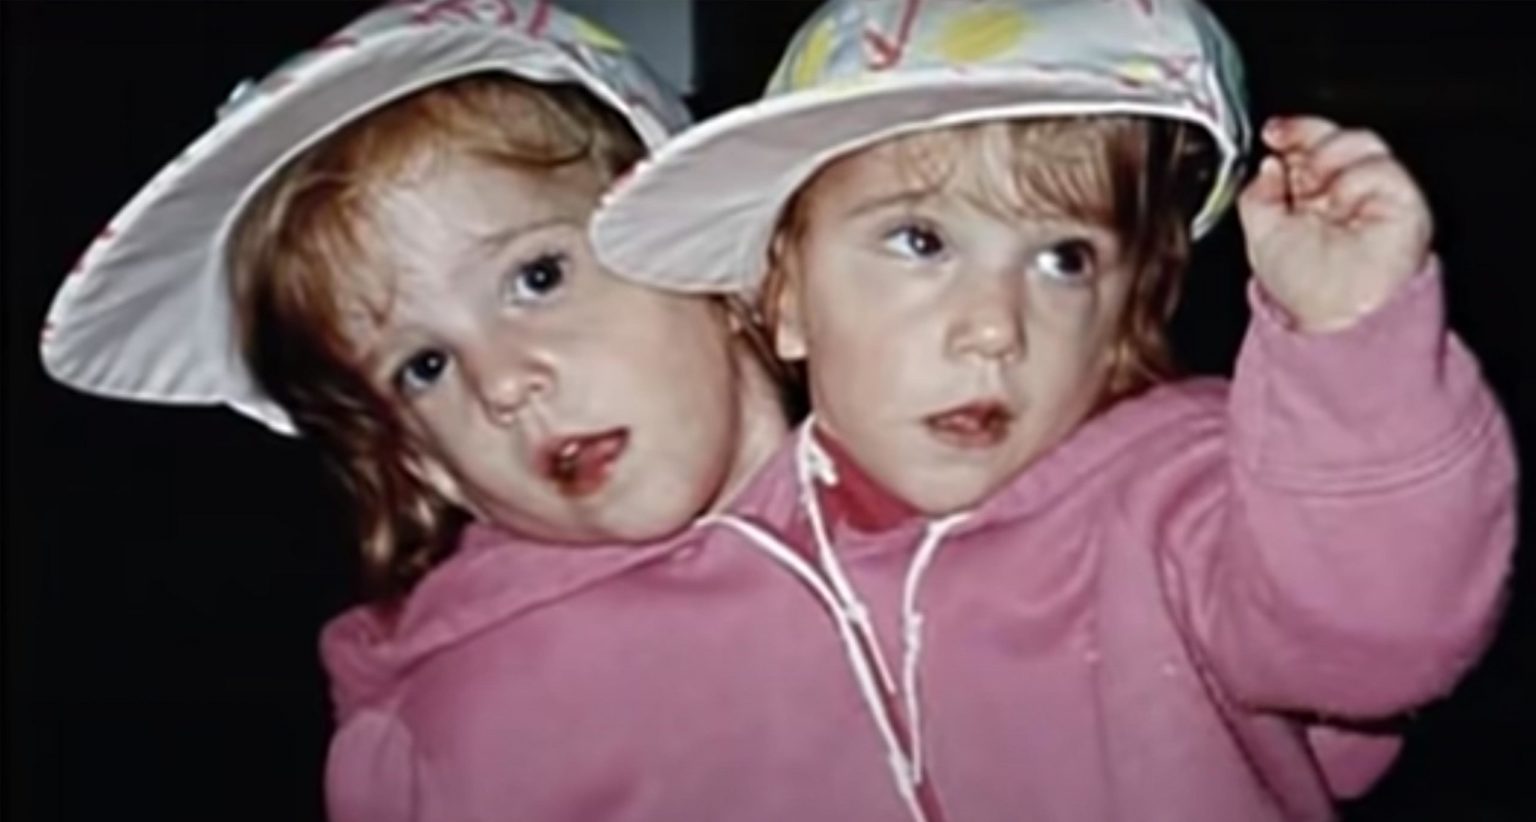 Abby and Brittany Hensel: The conjoined twins that reached worldwide ...